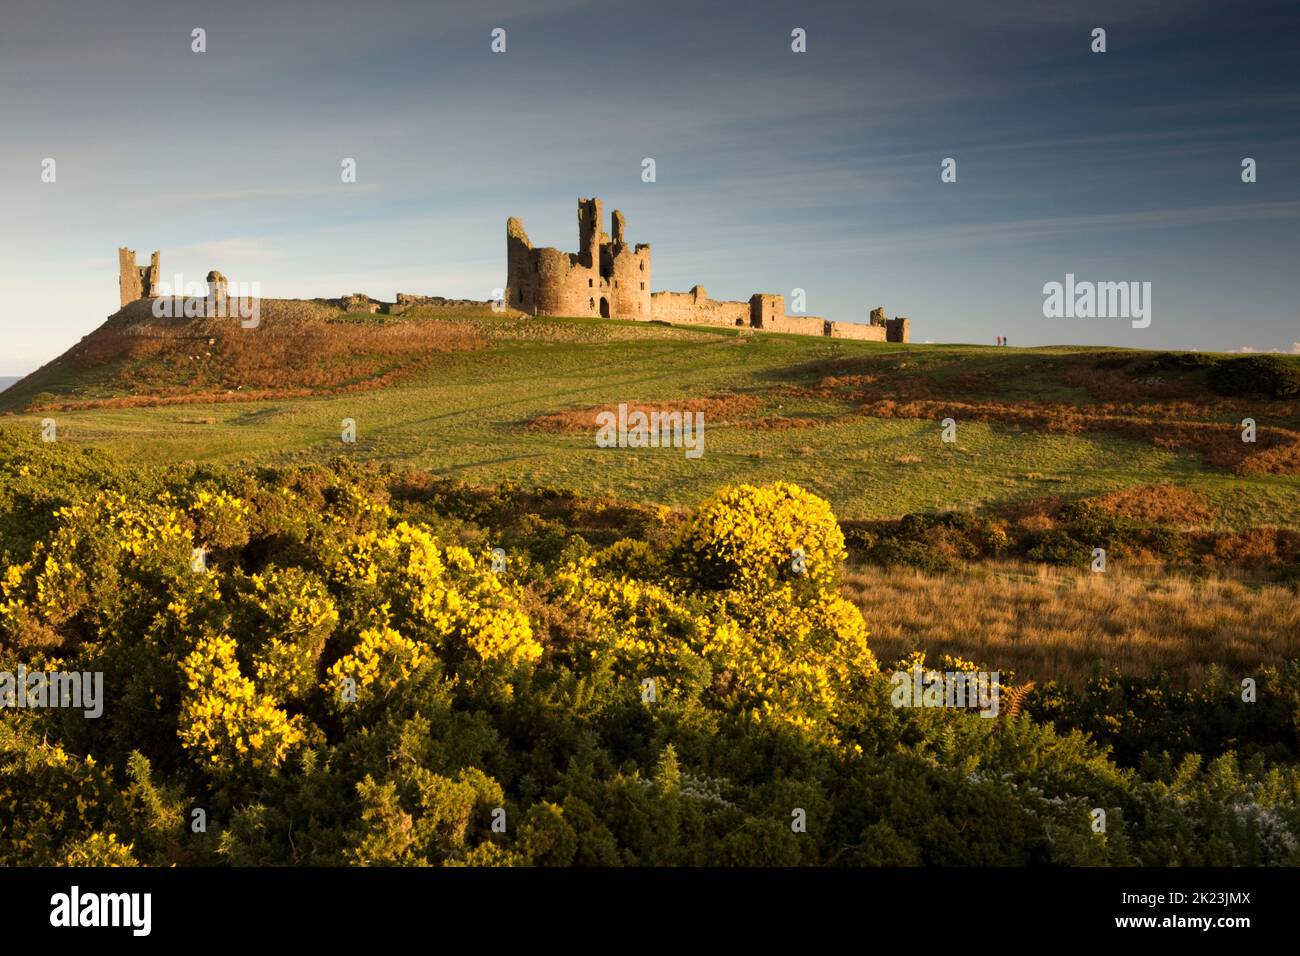 Flowering gorse in front of Dunstanburgh Castle which sits near the village of Craster on the Northumberland coast of England Stock Photo